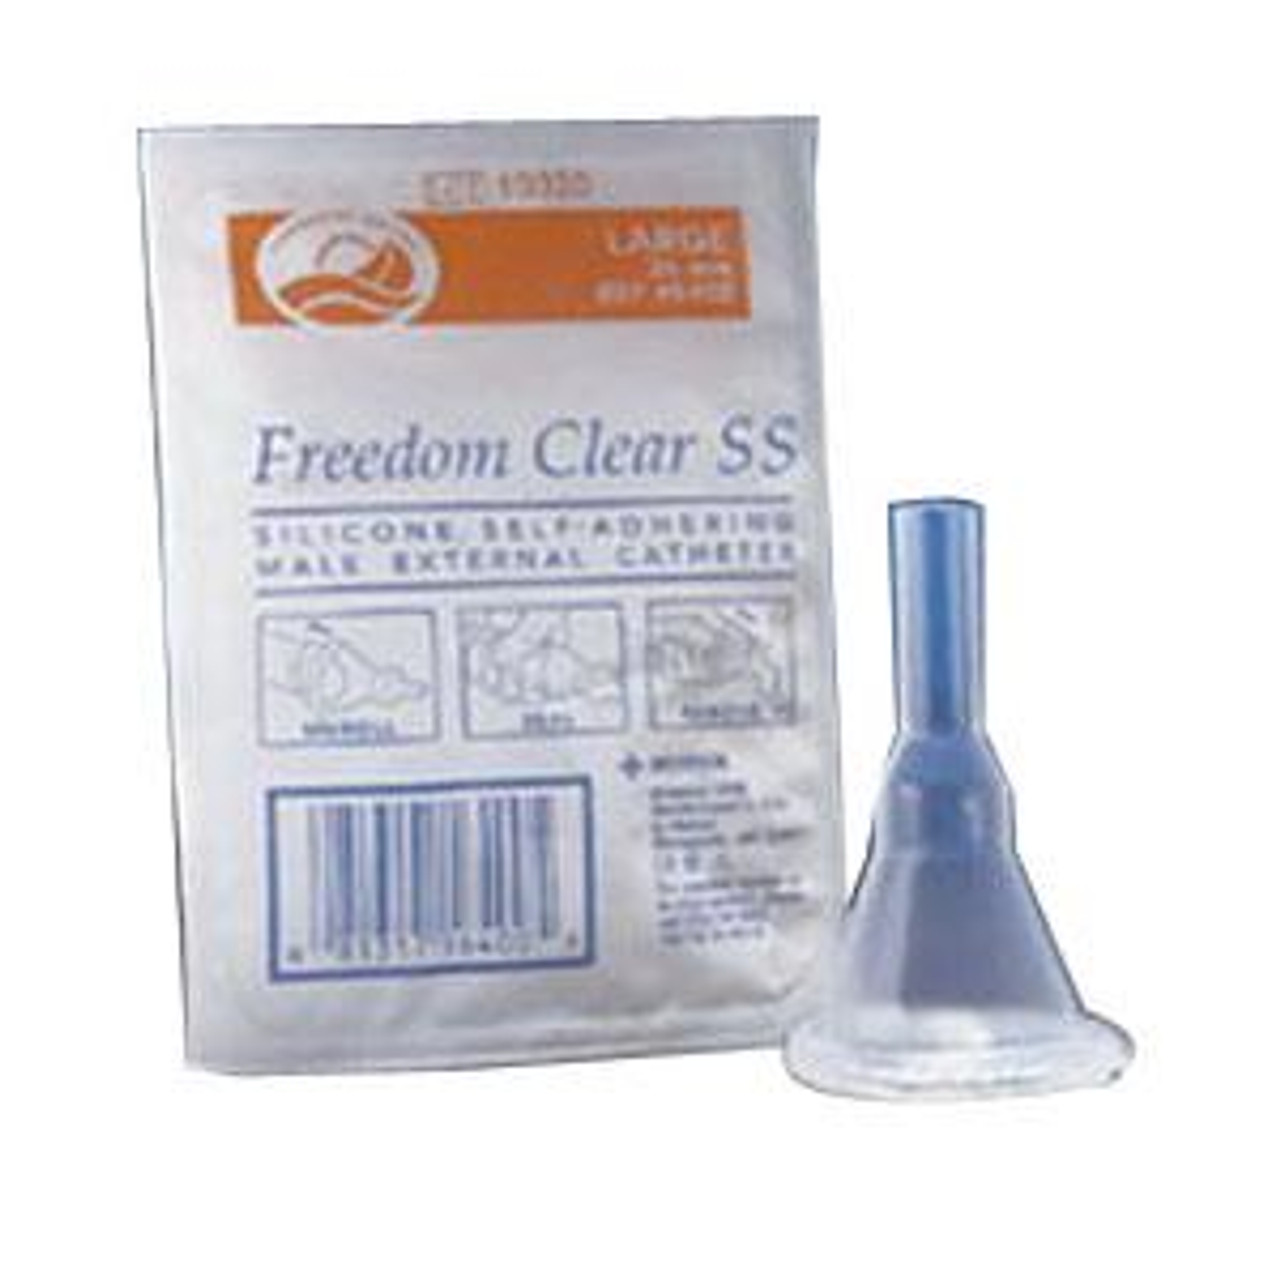 Coloplast 505311 5110 FREEDOM CLEAR SS SPORT SHEATH SILICONE SELF-ADHERING MALE EXTERNAL CATHETER, SIZE Small (23mm) BX/100